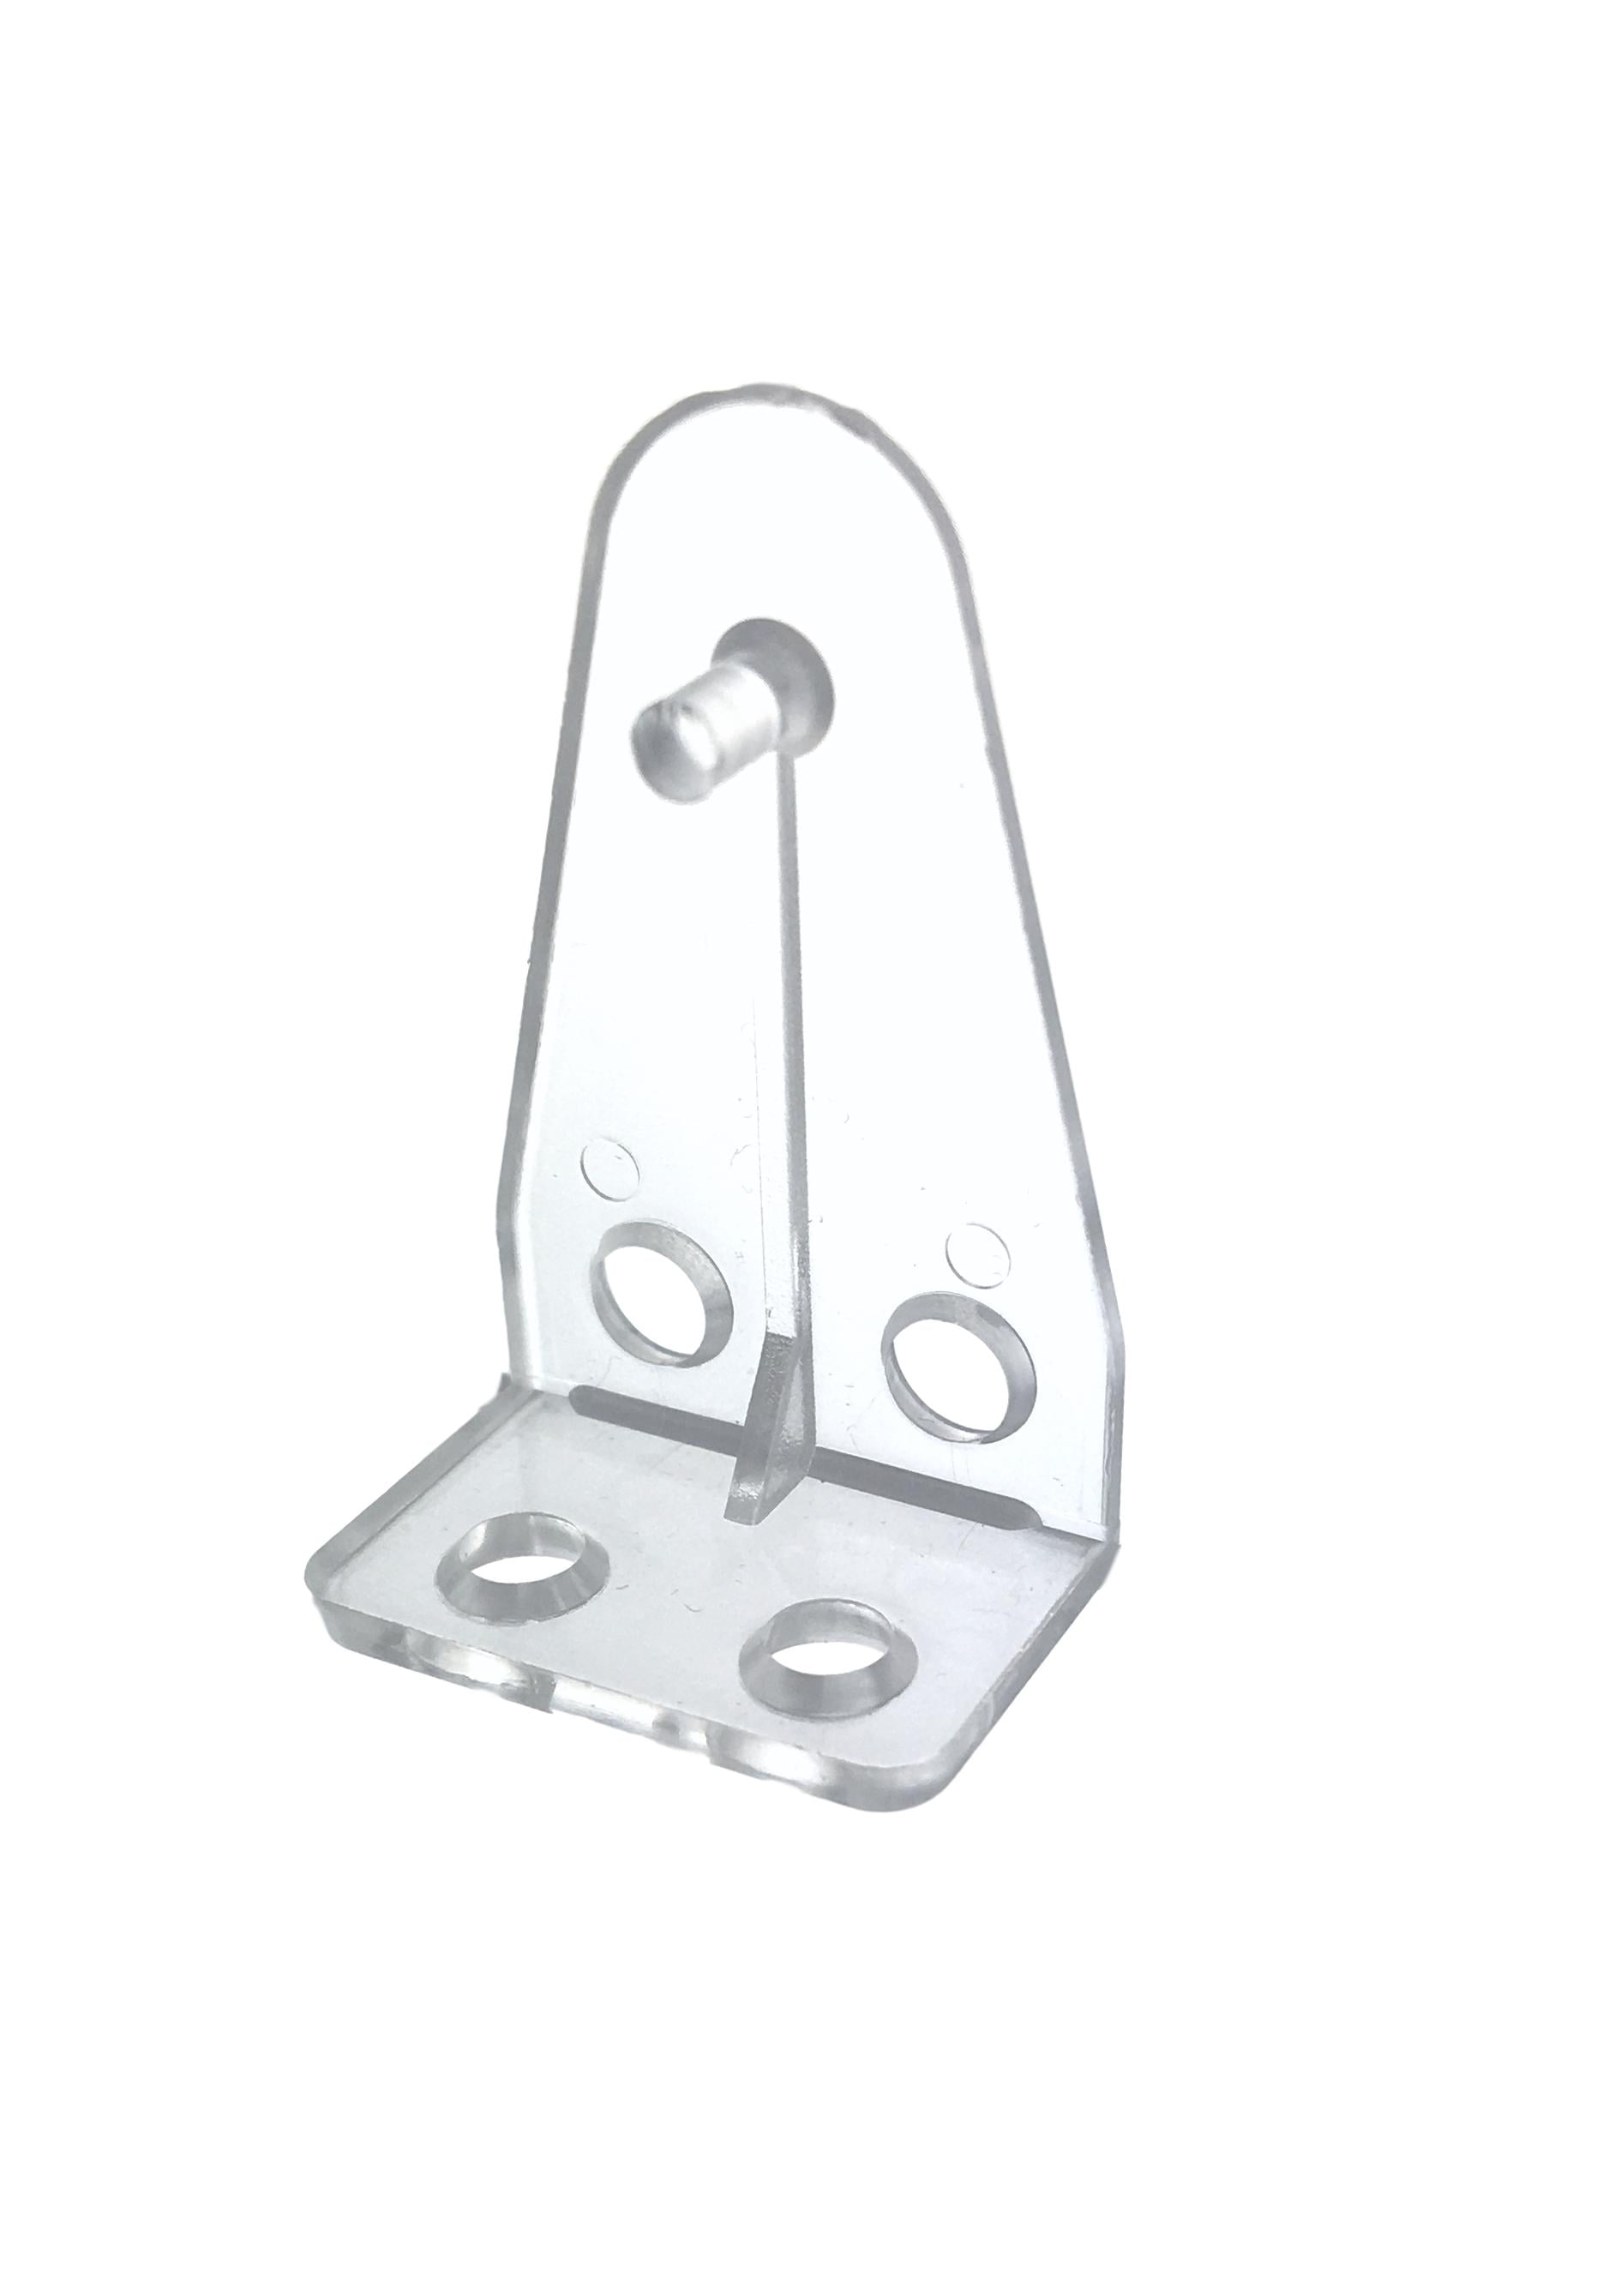 price Opinion snatch Hold Down Bracket for 1 inch Mini Blinds or Cellular Shades Clear Plastic  with Intergrated Pin (Screws Not Included) 10 Pieces Per Pack - Walmart.com